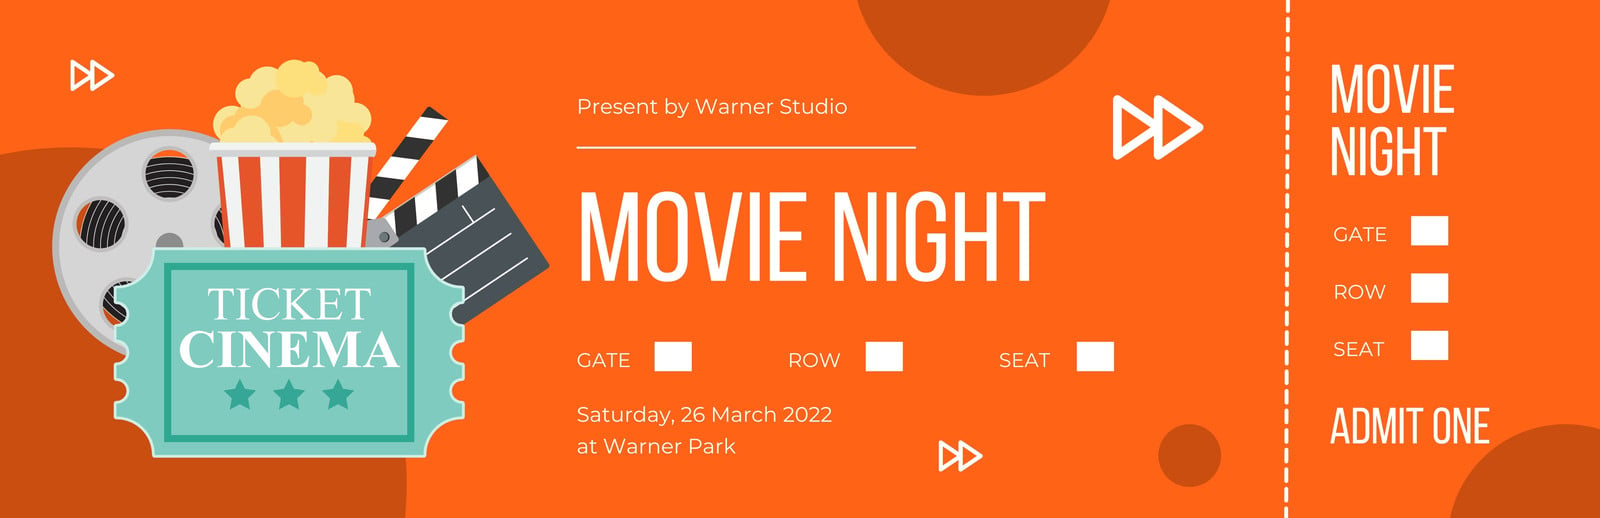 free printable and customizable movie ticket templates canva